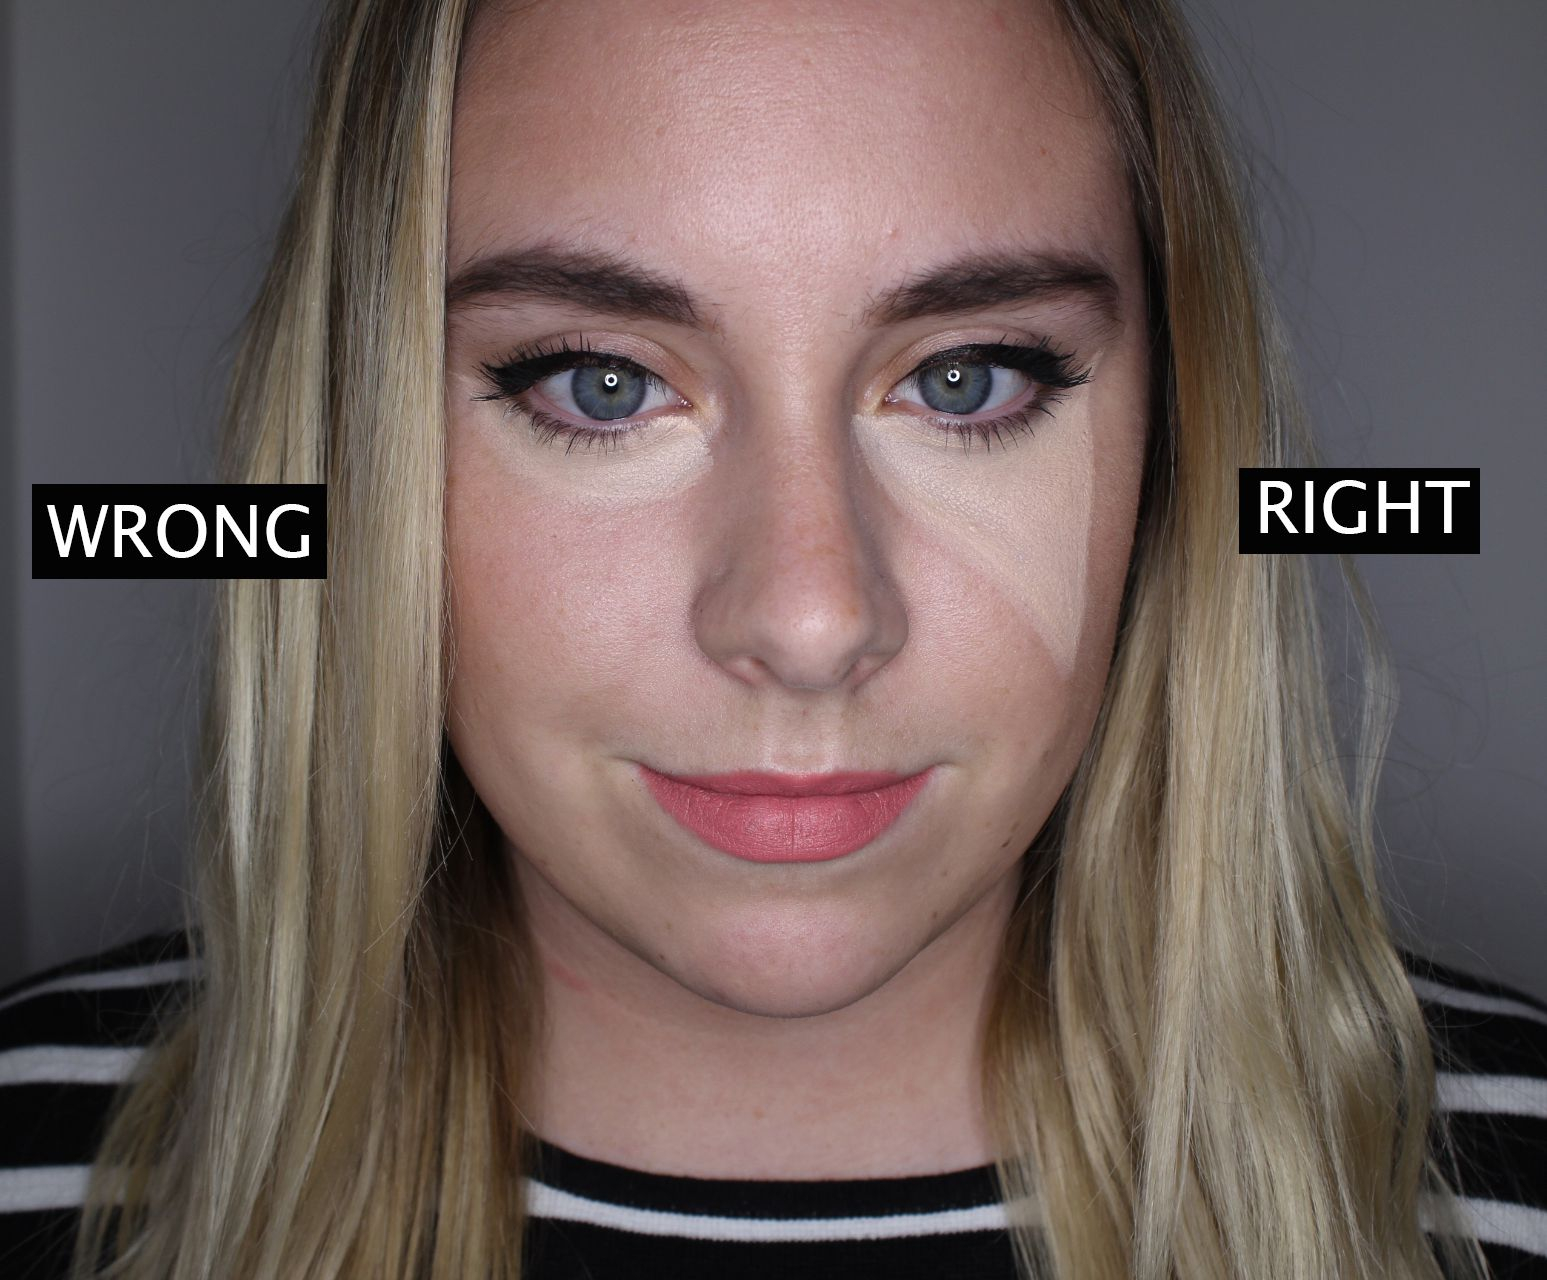 Makeup For Small Brown Eyes How To Make Your Eyes Look Bigger With And Without Makeup 10 Hacks